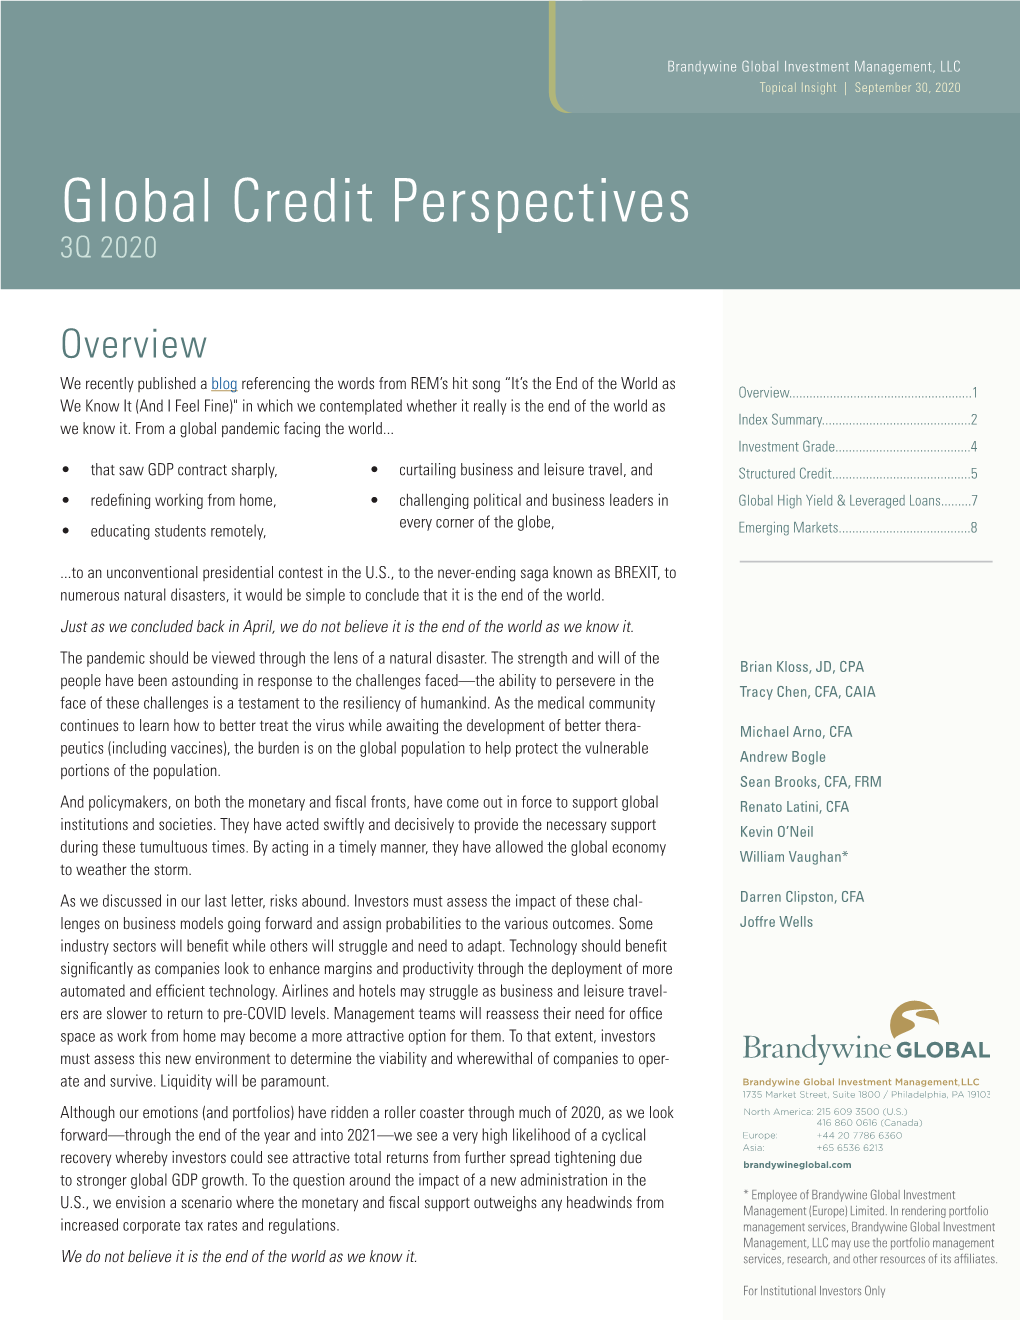 Global Credit Perspectives 3Q 2020